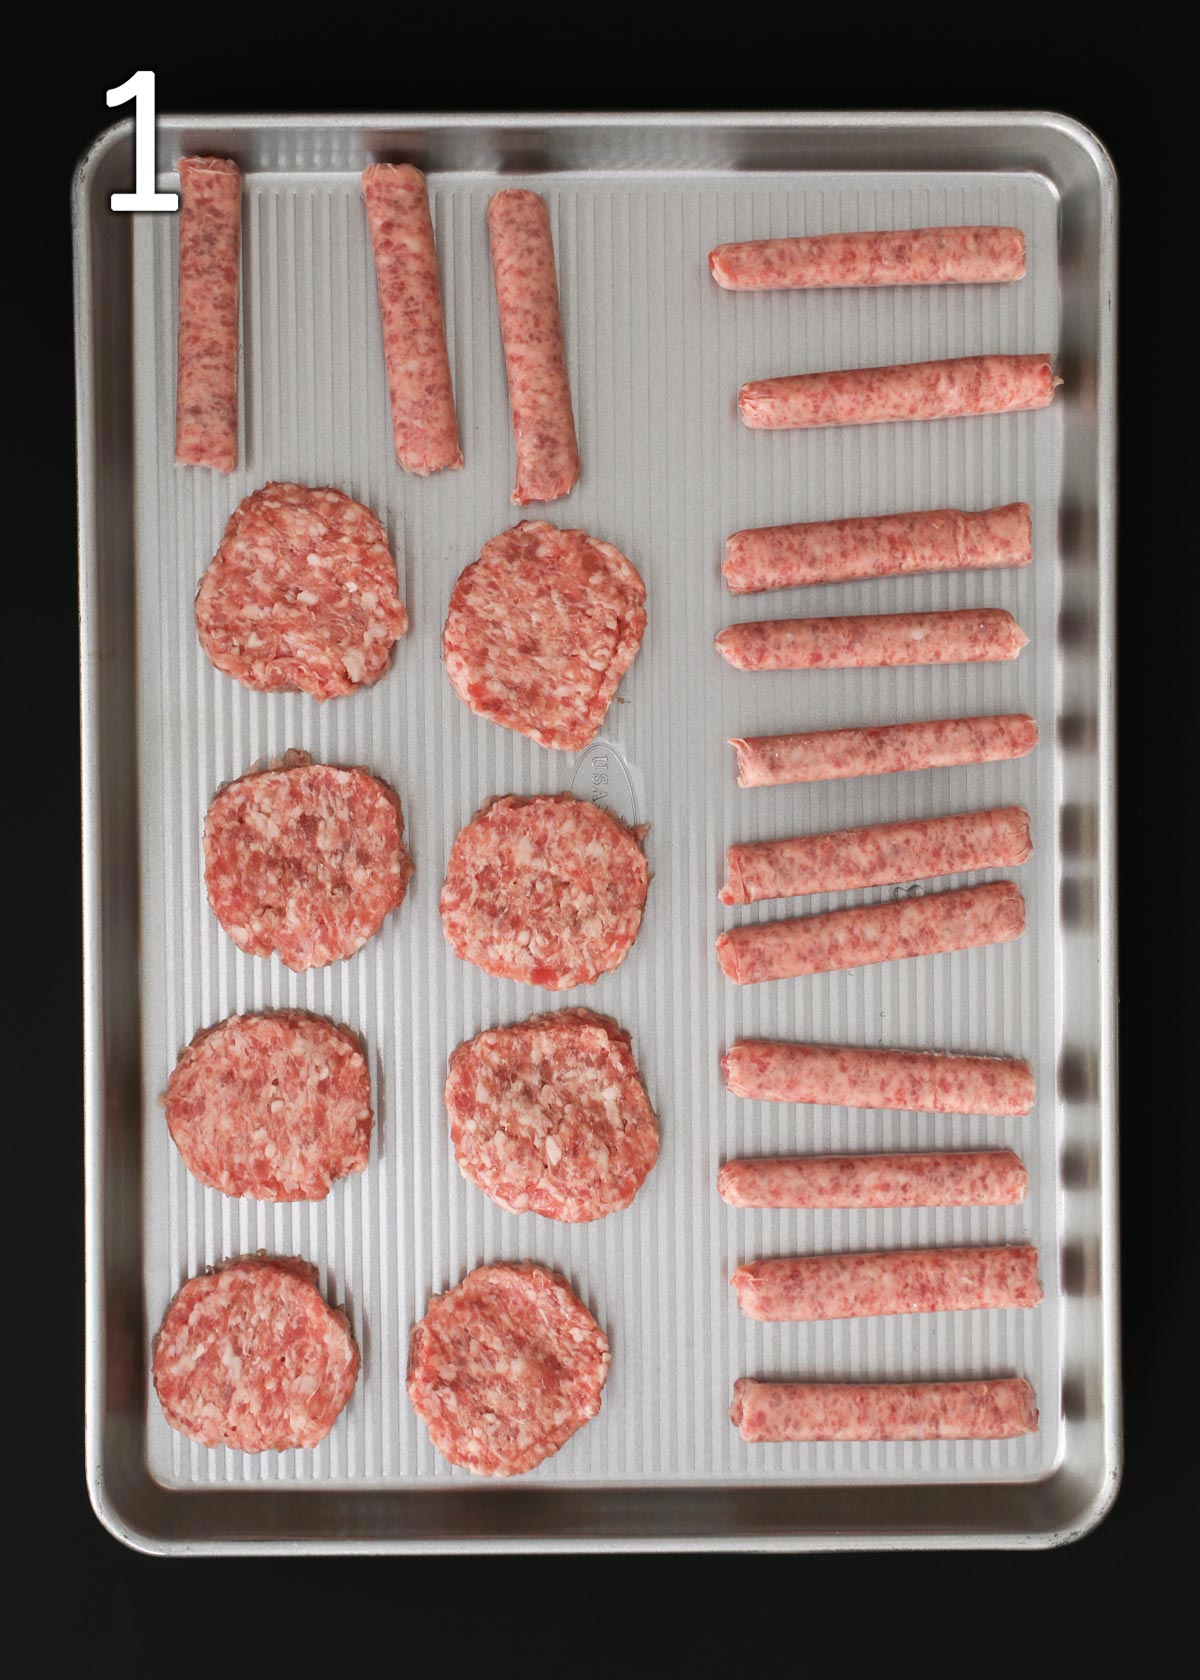 uncooked sausages on rimmed sheet pan on black table.